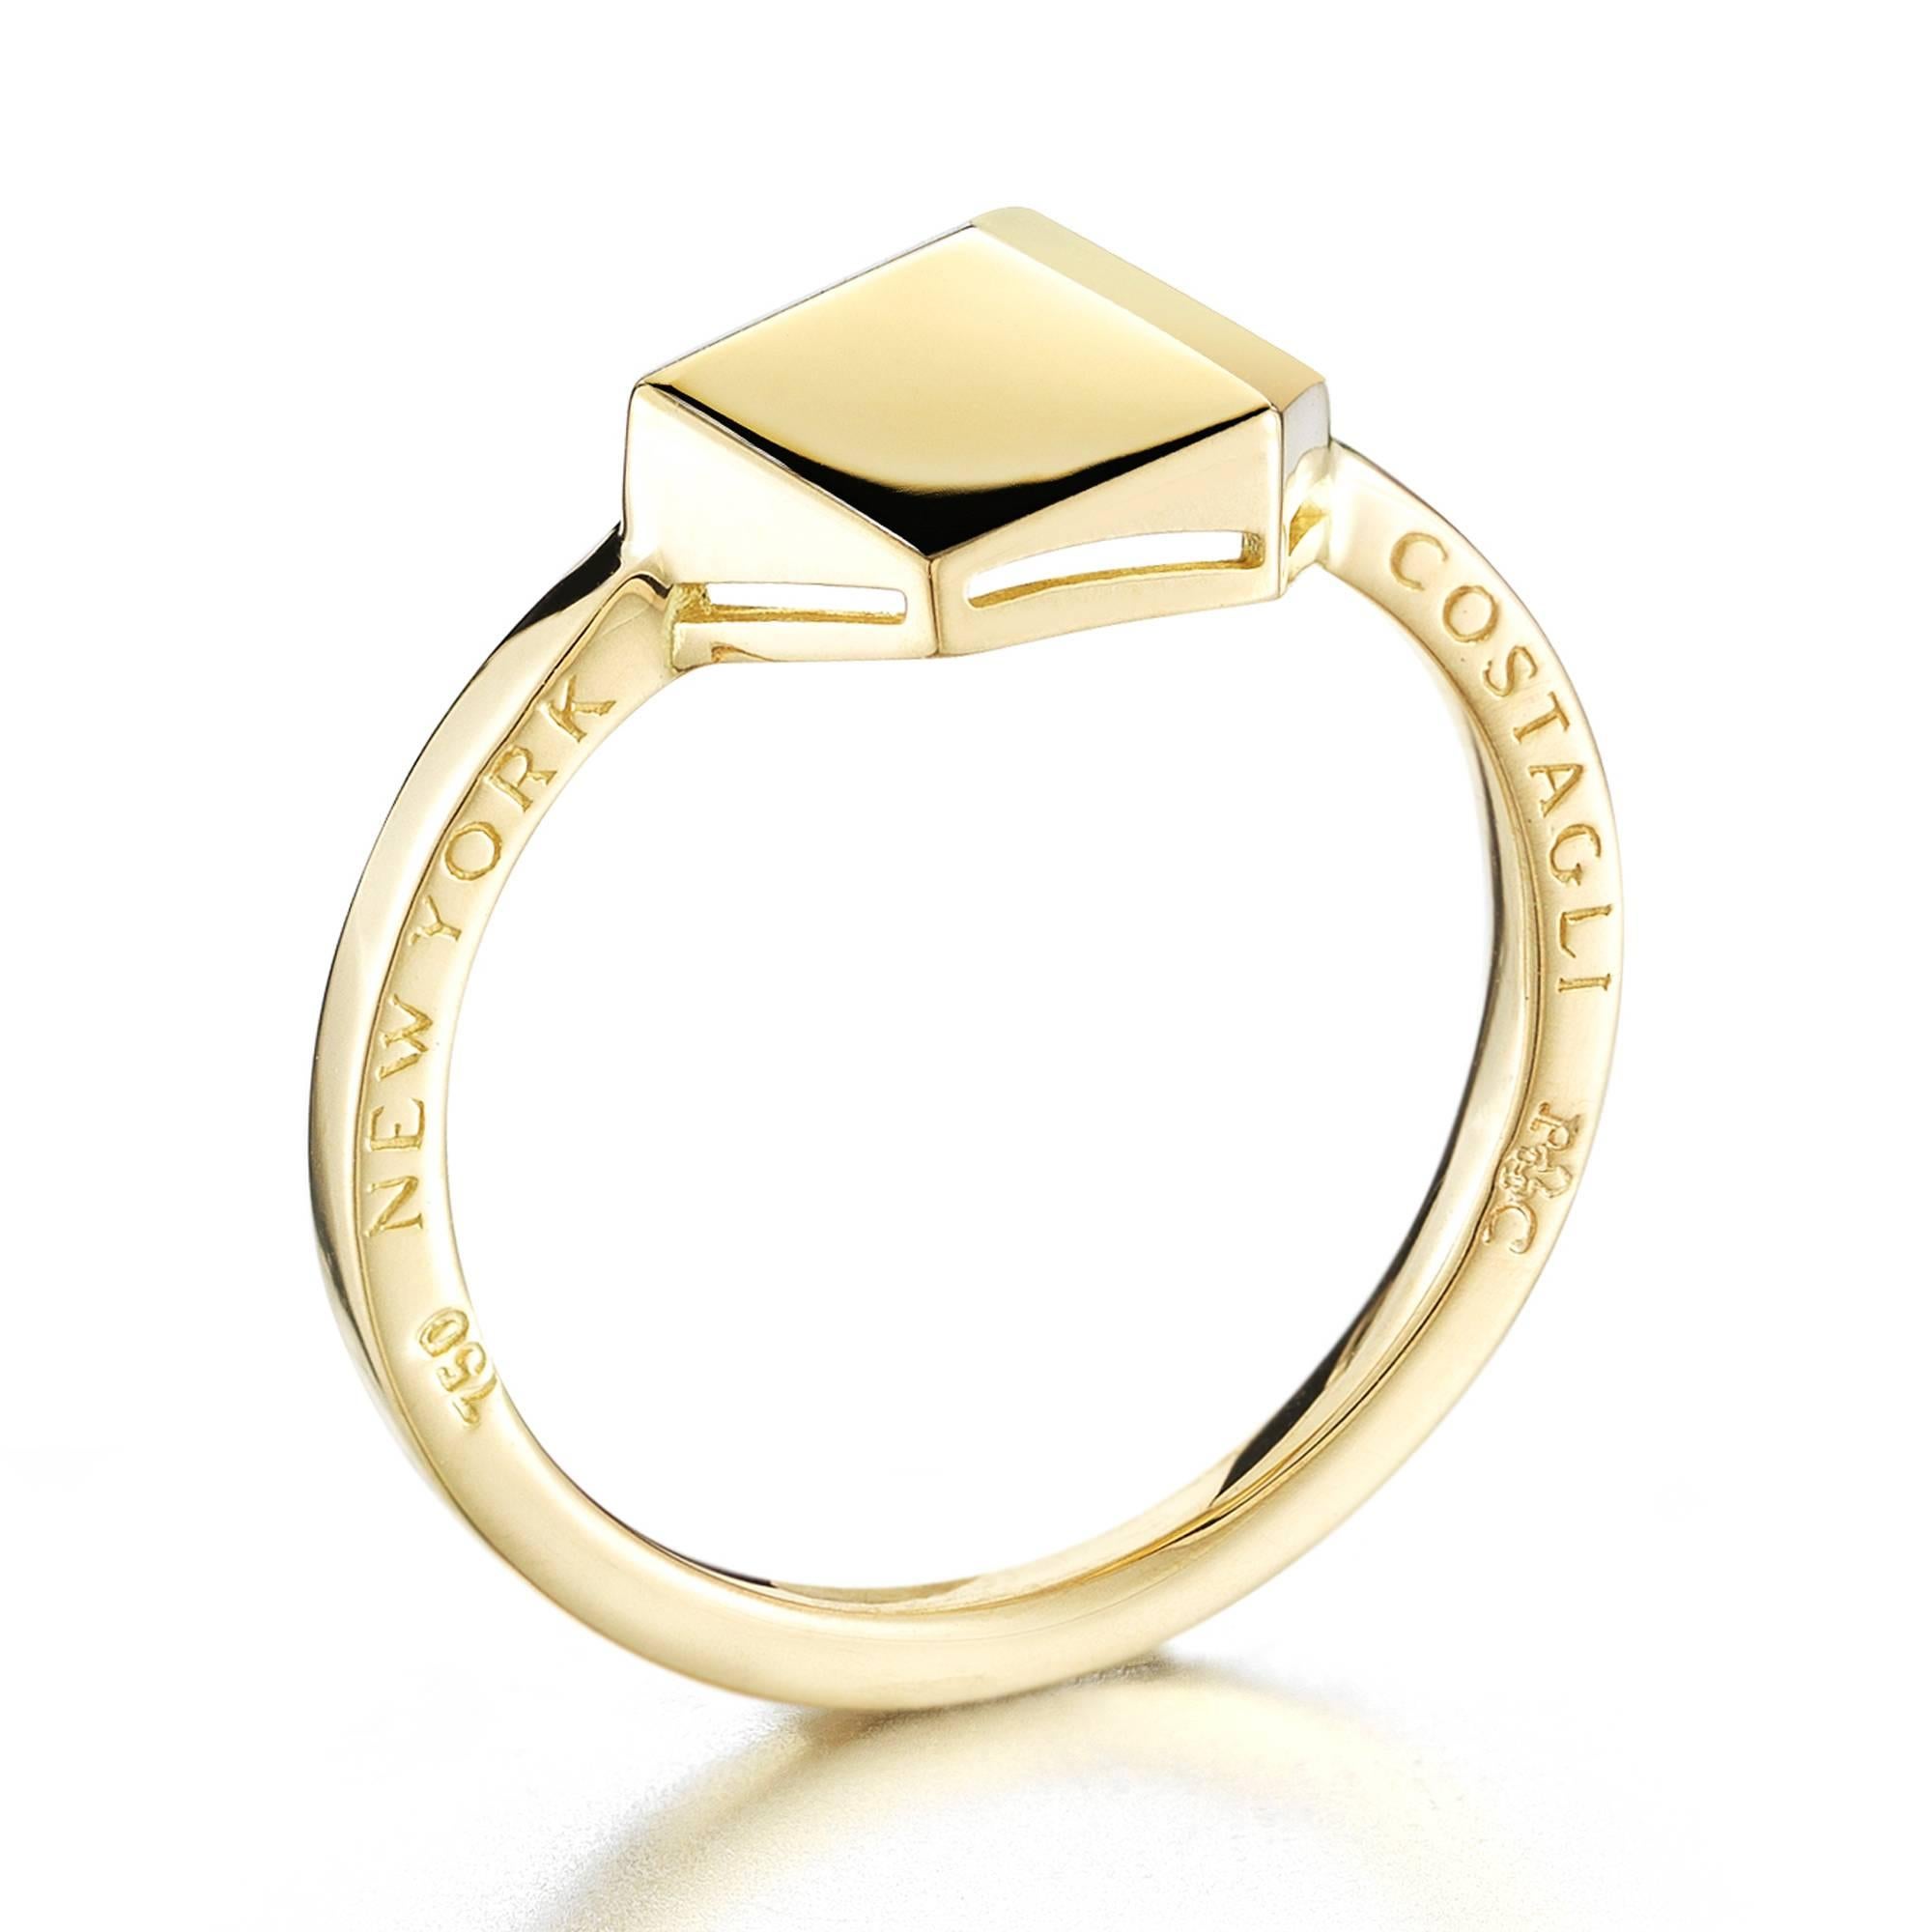 High polish 18kt yellow gold Brillante® ring. Also available with diamonds.

Translated from a quintessential Venetian motif, the Brillante® jewelry collection combines strong jewelry design, cutting edge technology and fine engineering.

A bracelet